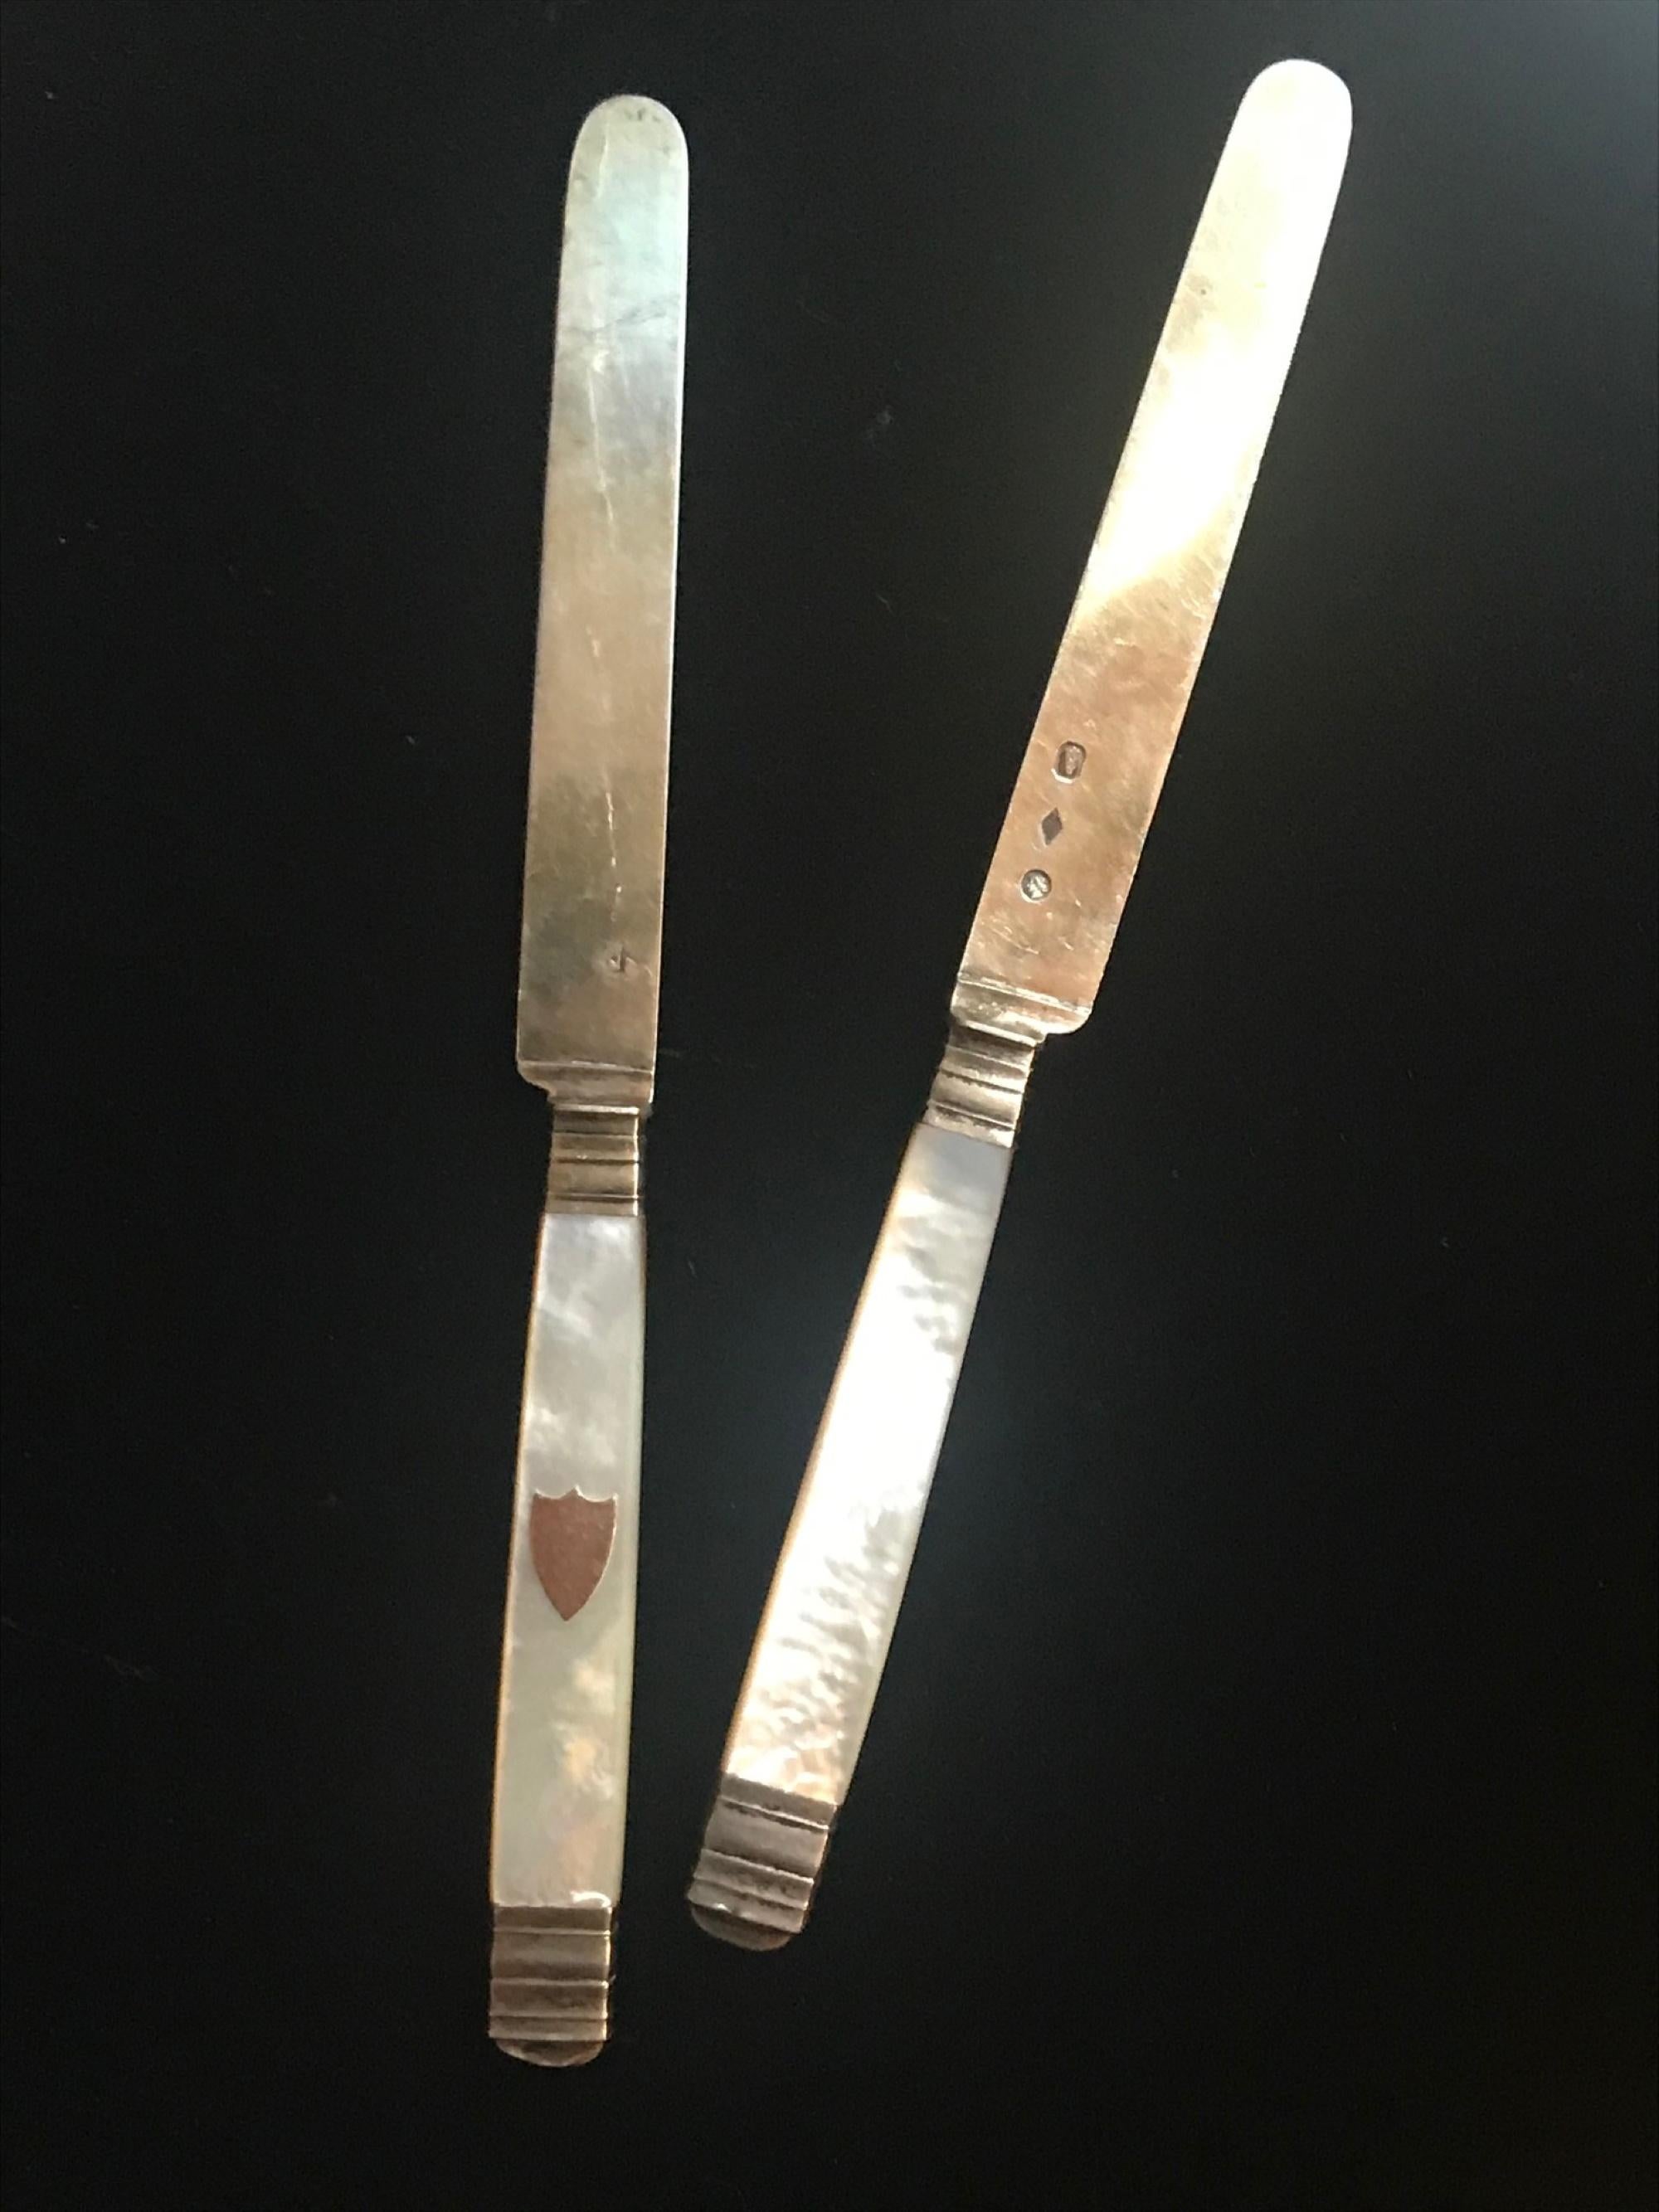 Pair of antique French silver gilt fruit knives with mother of pearl handle, Paris 1820

This exquisite pair of early 19th century silver fruit knives is mounted with mother of pearl handles. The solid silver and gilded blades are struck four